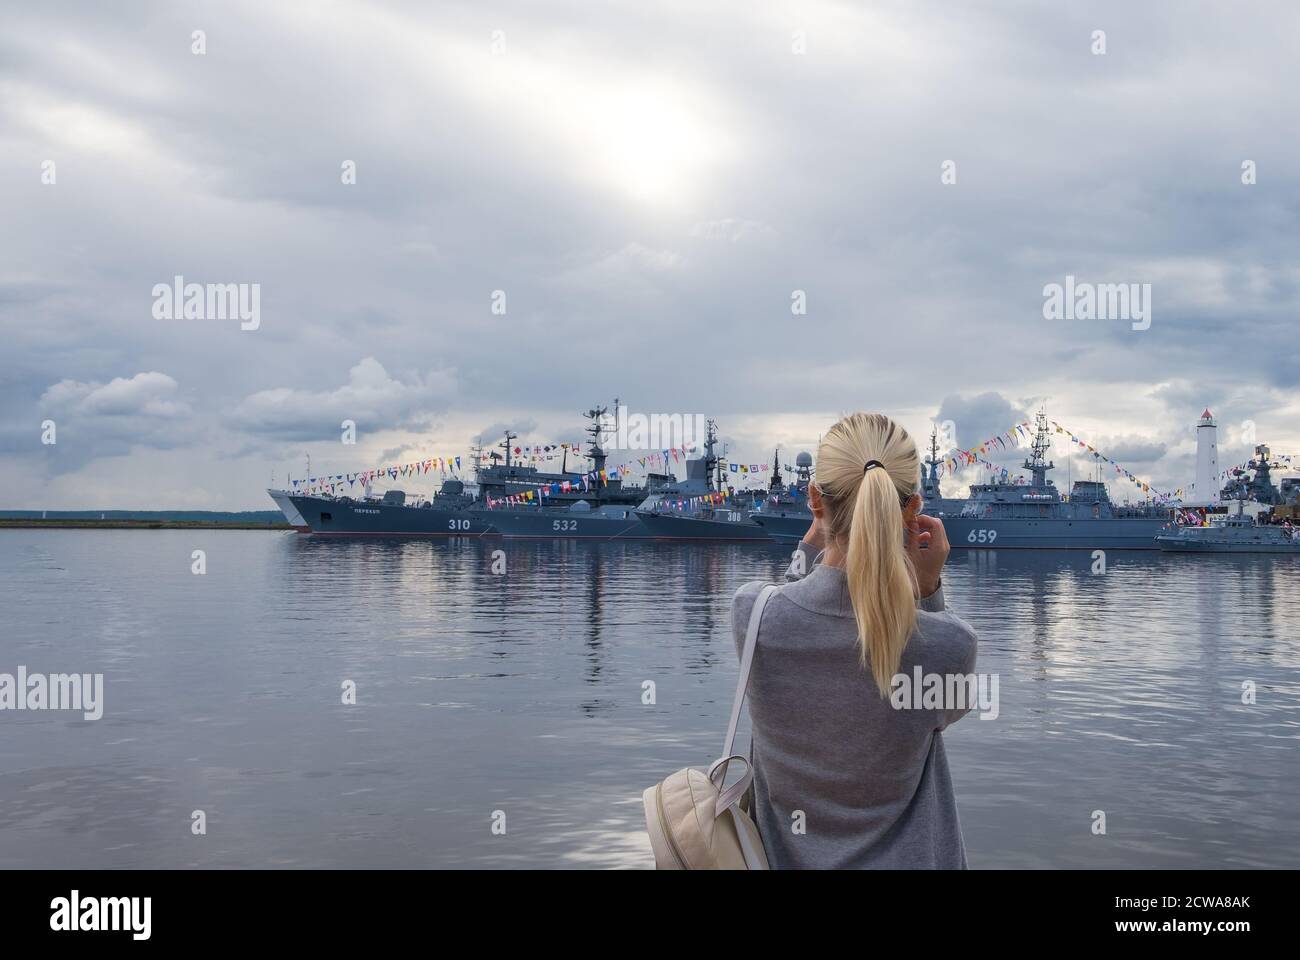 Kronshtadt, St. Petersburg: August 29, 2020. Young woman, blonde, looks at military warships with color-coded festive flags standing at the pier again Stock Photo